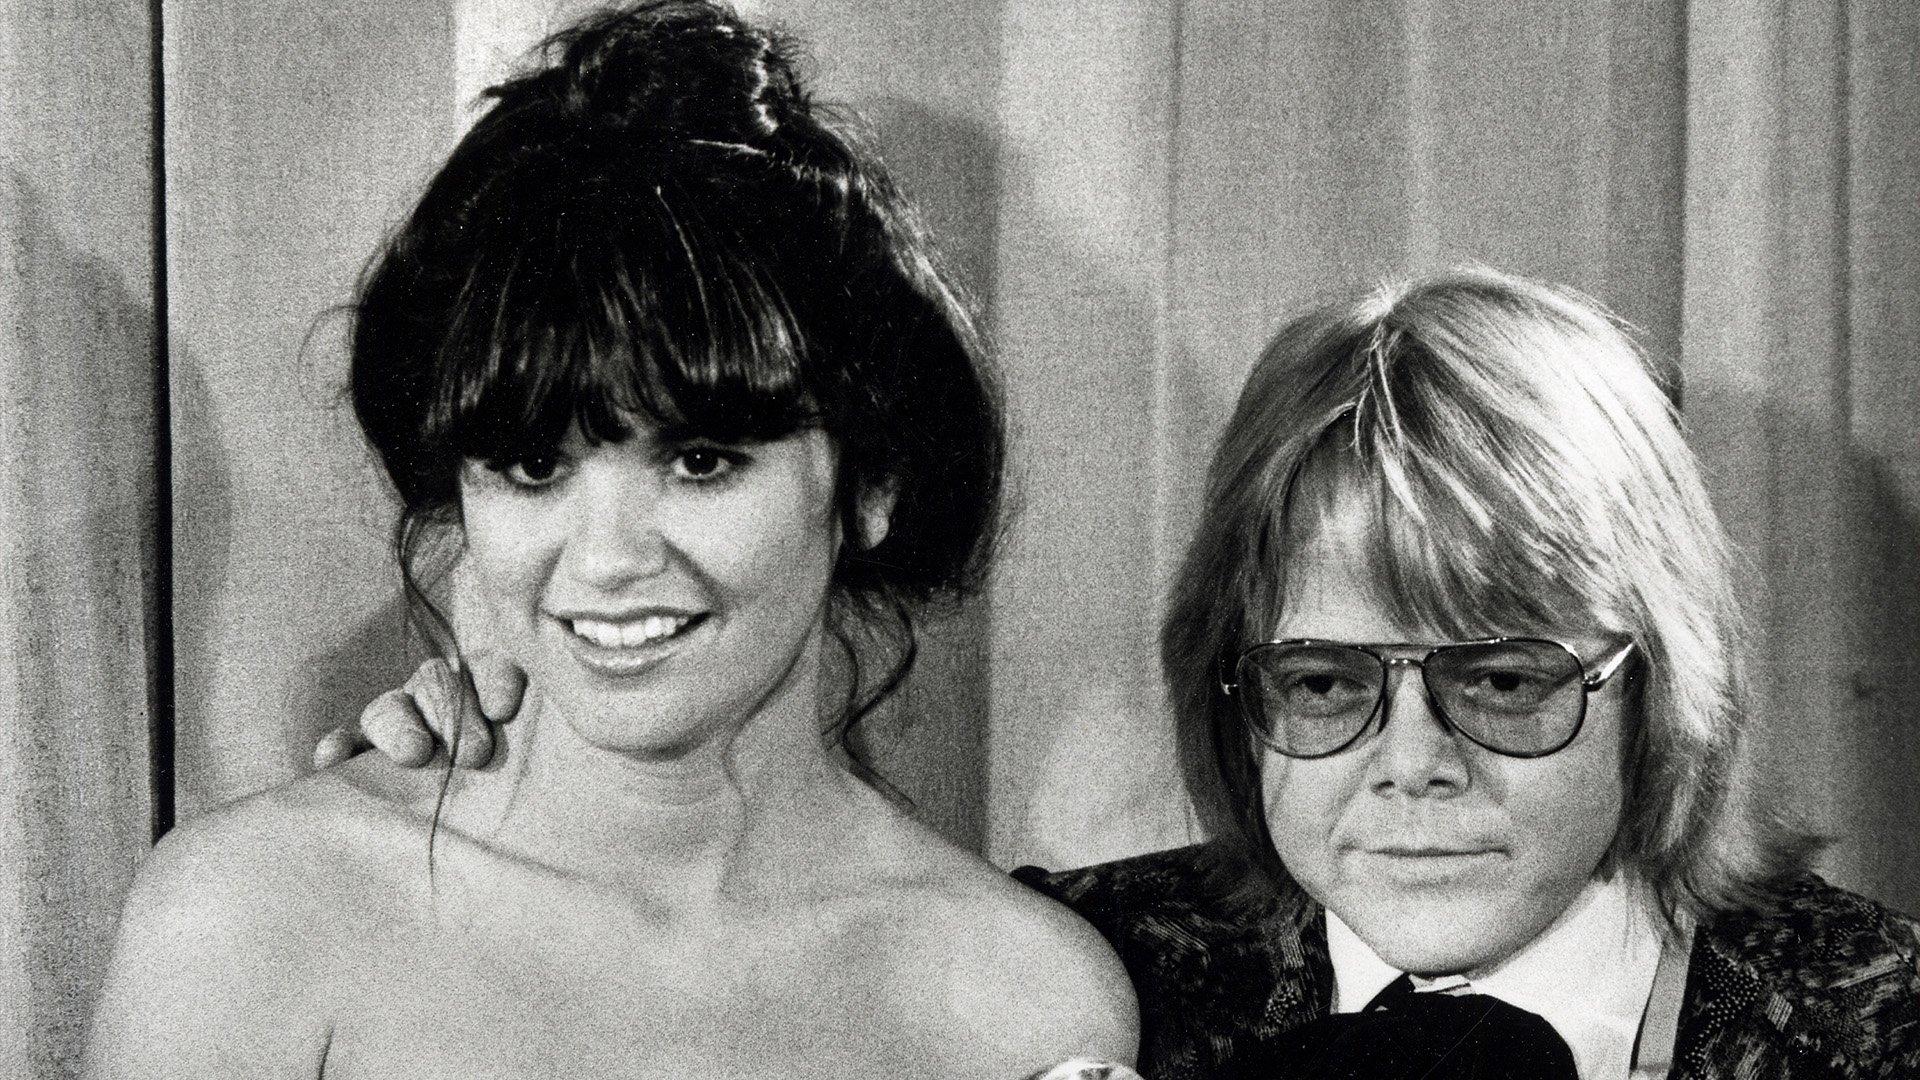 Linda Ronstadt at the 1977 GRAMMYs